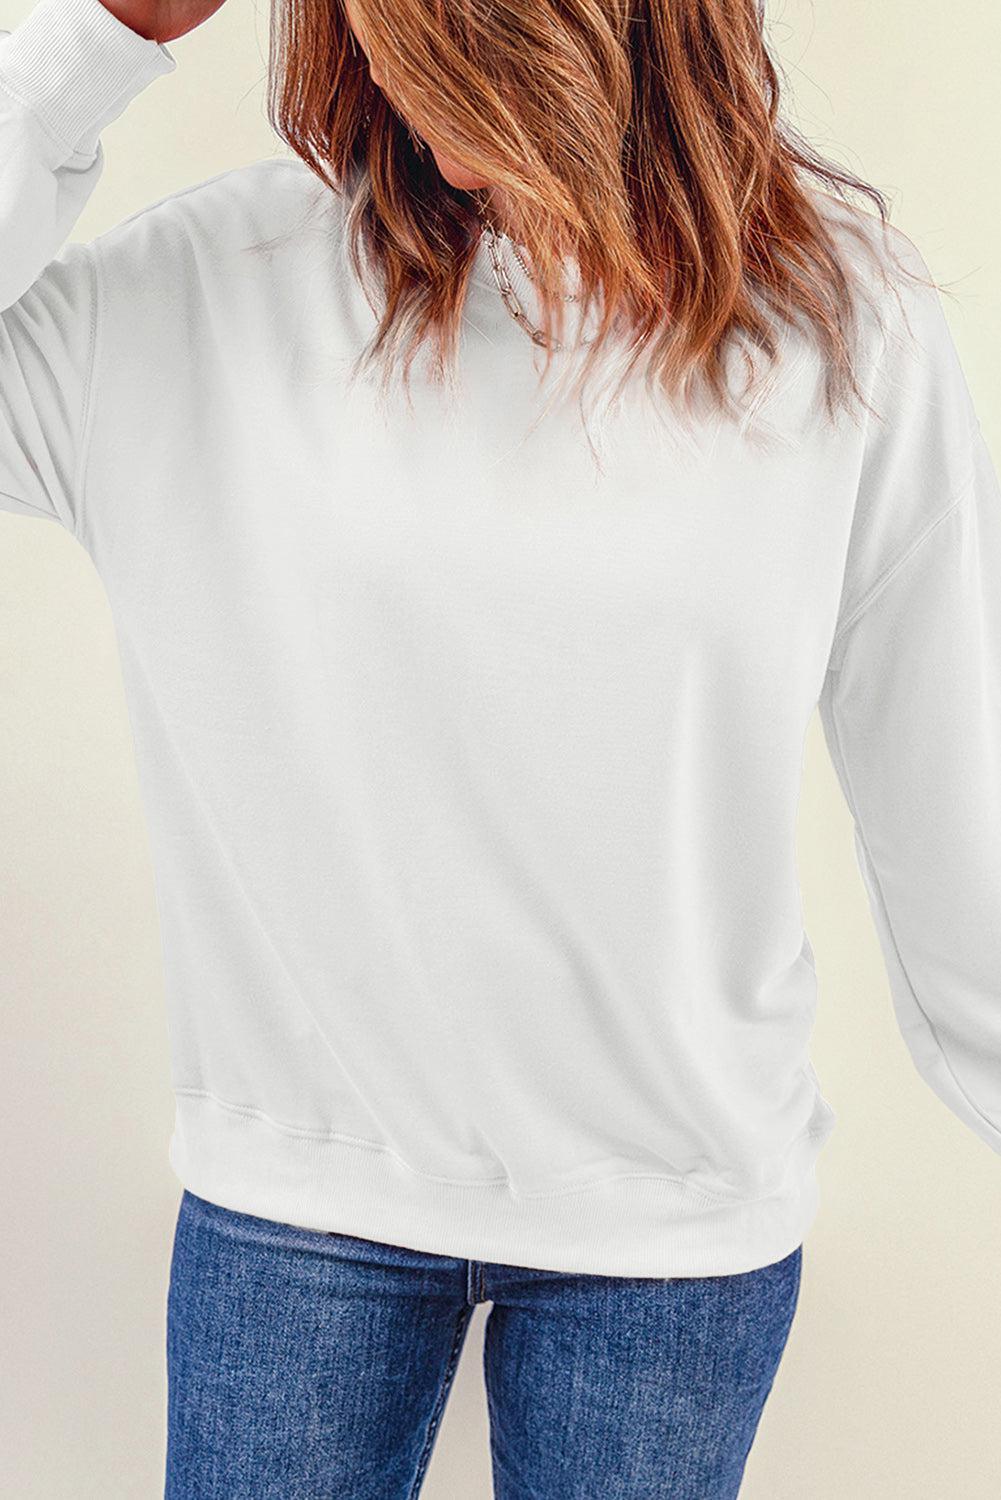 a woman wearing a white sweatshirt and jeans